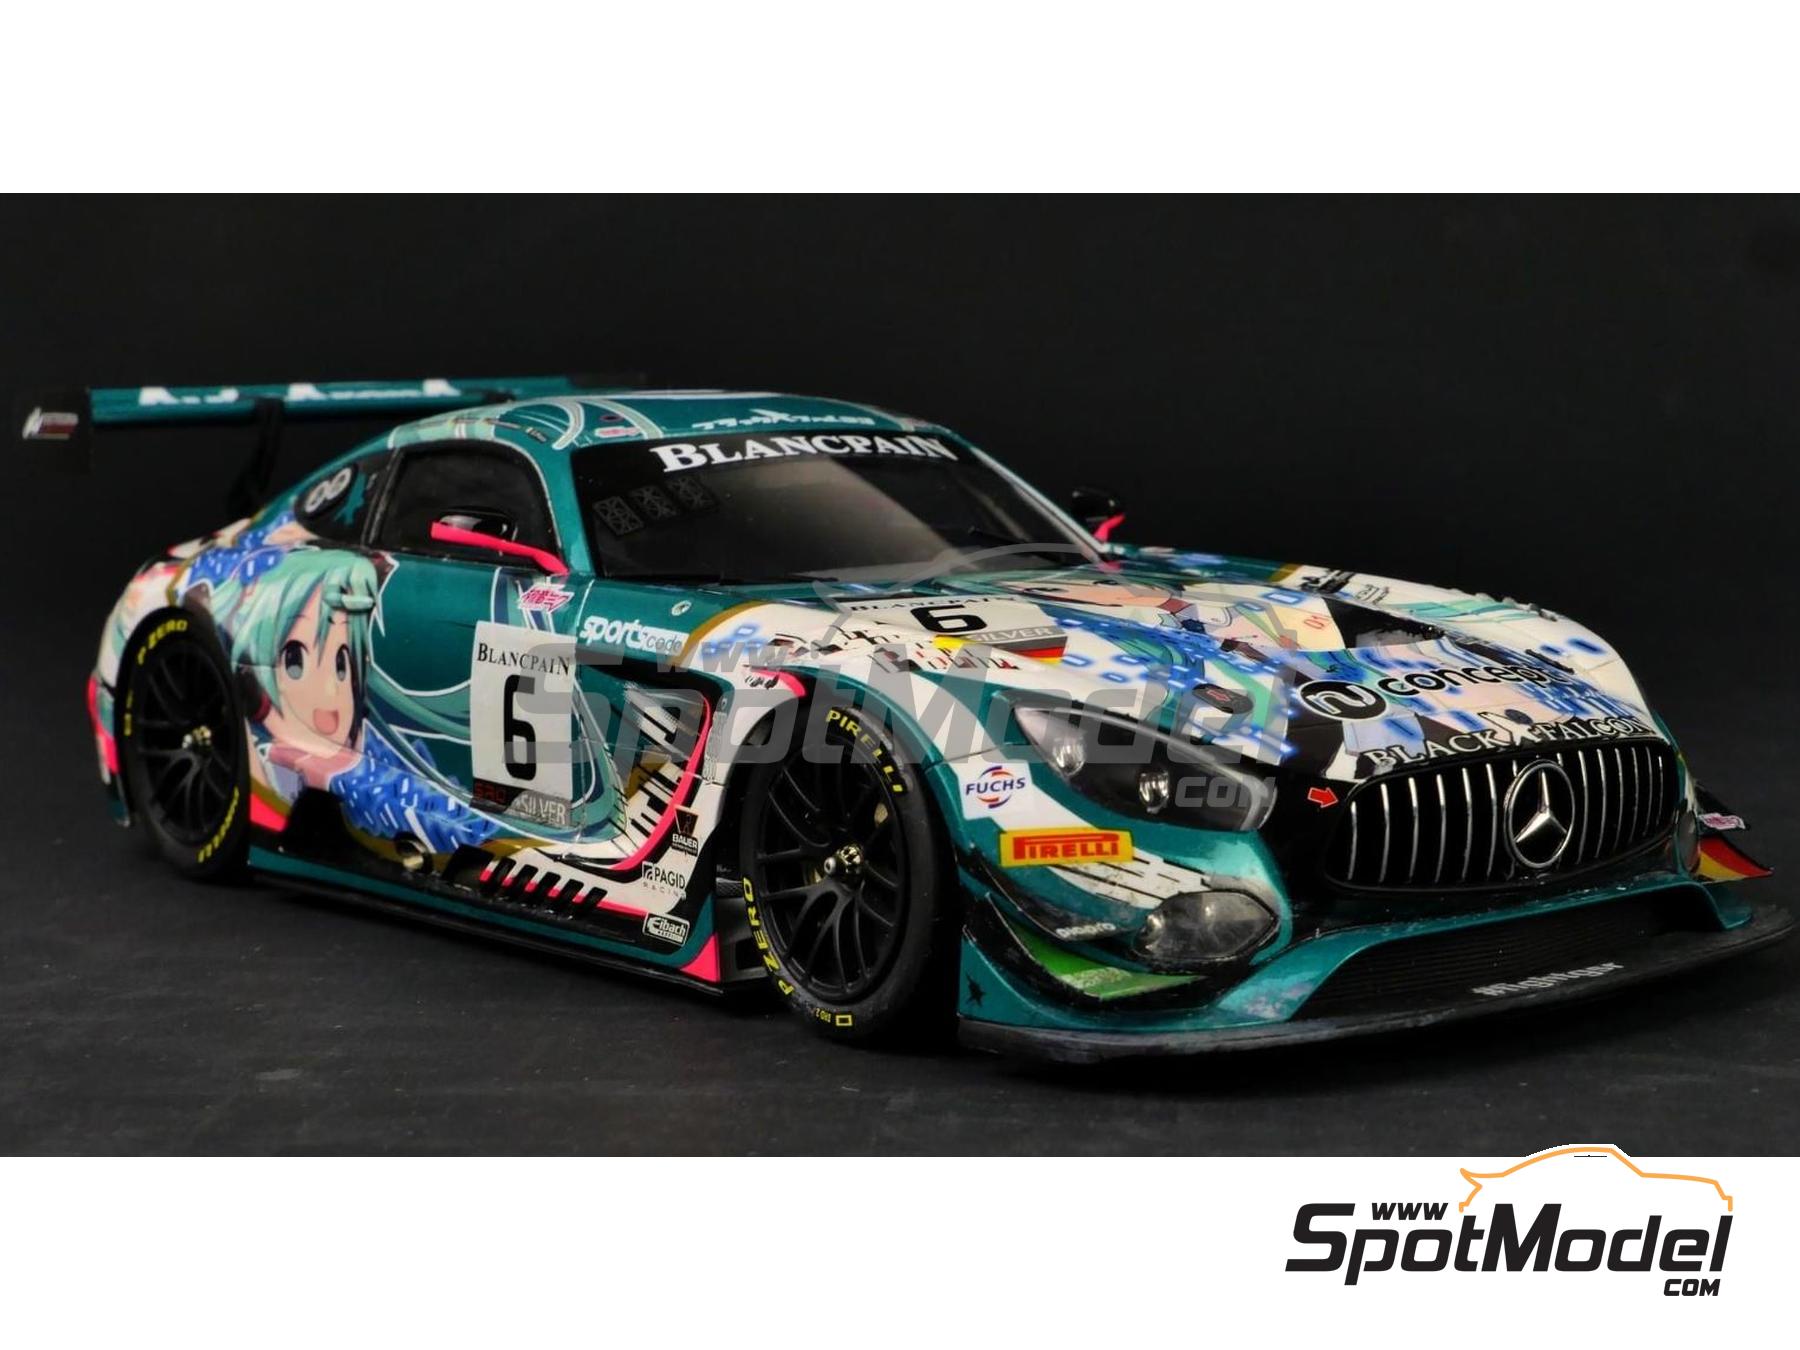 Mercedes AMG GT3 Good Smile Racing Black Falcon Team sponsored by  AutoArenA.de - Total 24 hours of Spa 2019. Marking / livery in 1/24 scale  manufactur